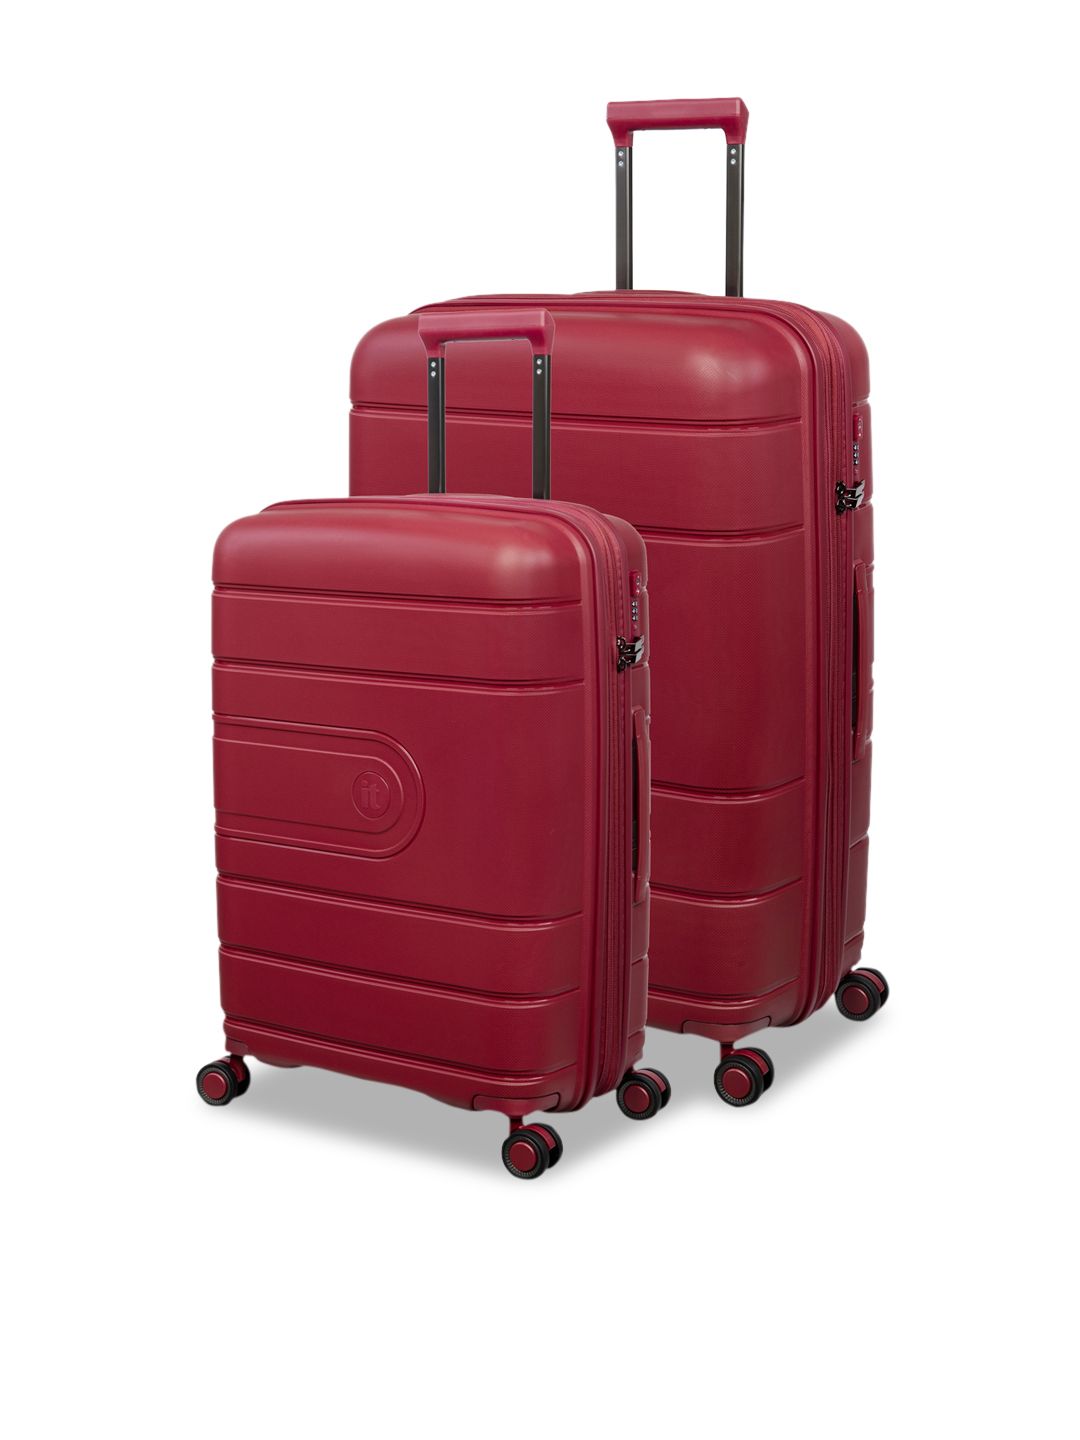 IT luggage Set Of 2 Red Solid Hard-Sided Trolley Suitcases Price in India